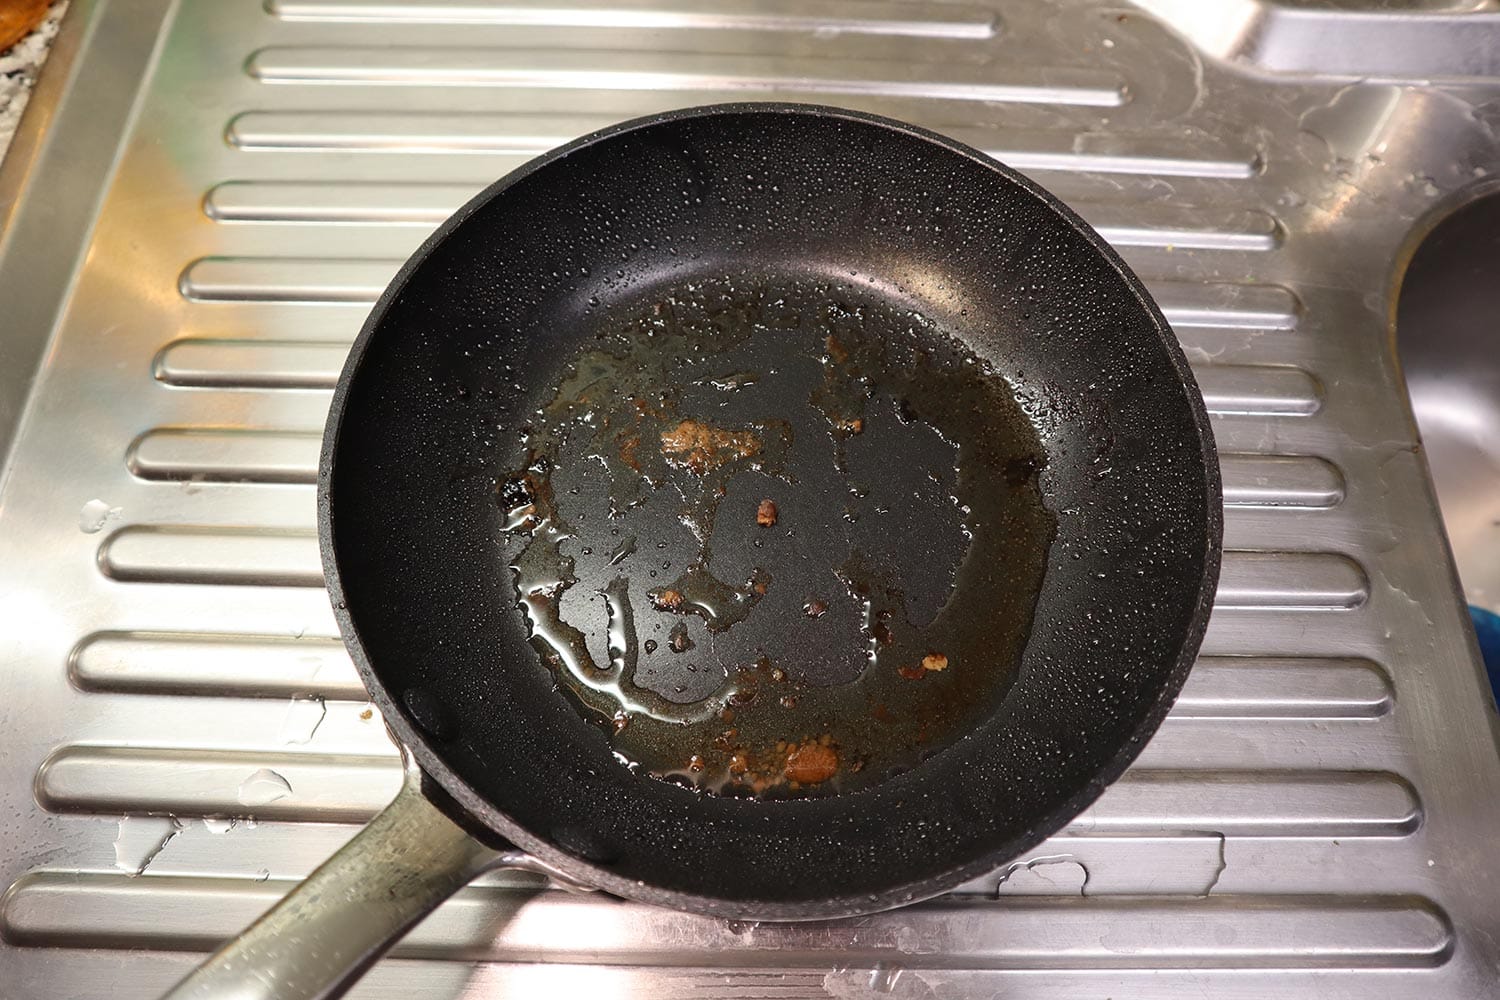 A black dirty non stick frying pan with grease splatter and food residue